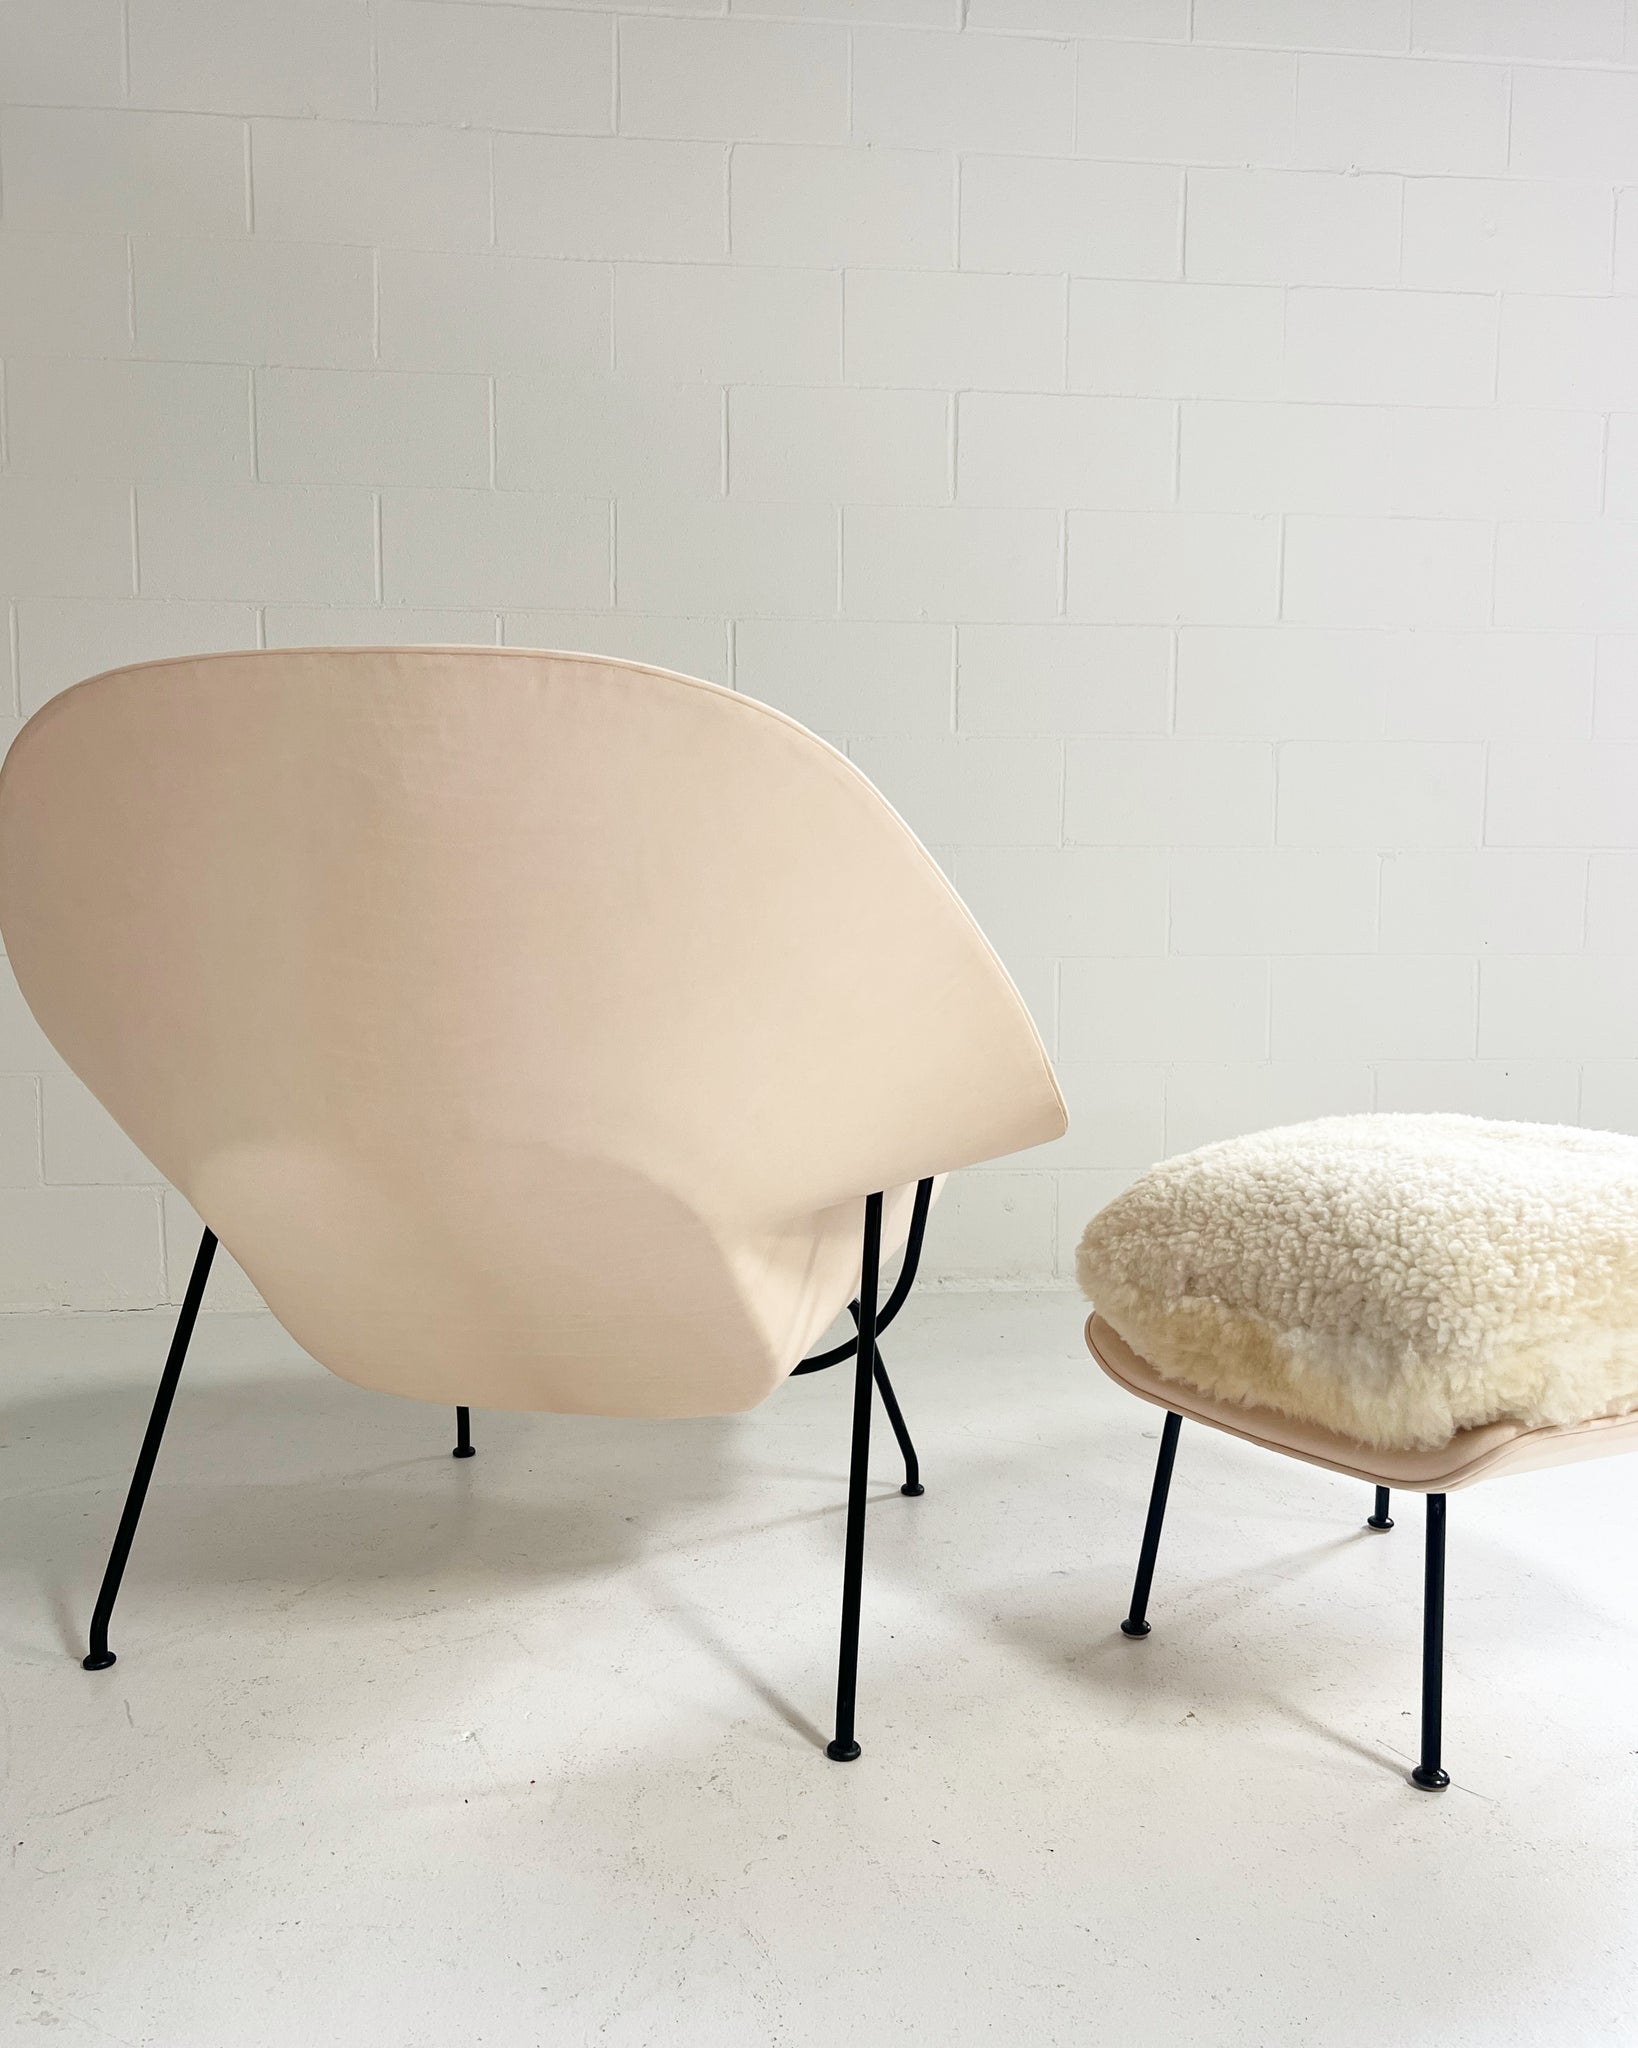 One-of-a-Kind Womb Chair and Ottoman in Leather and Sheepskin